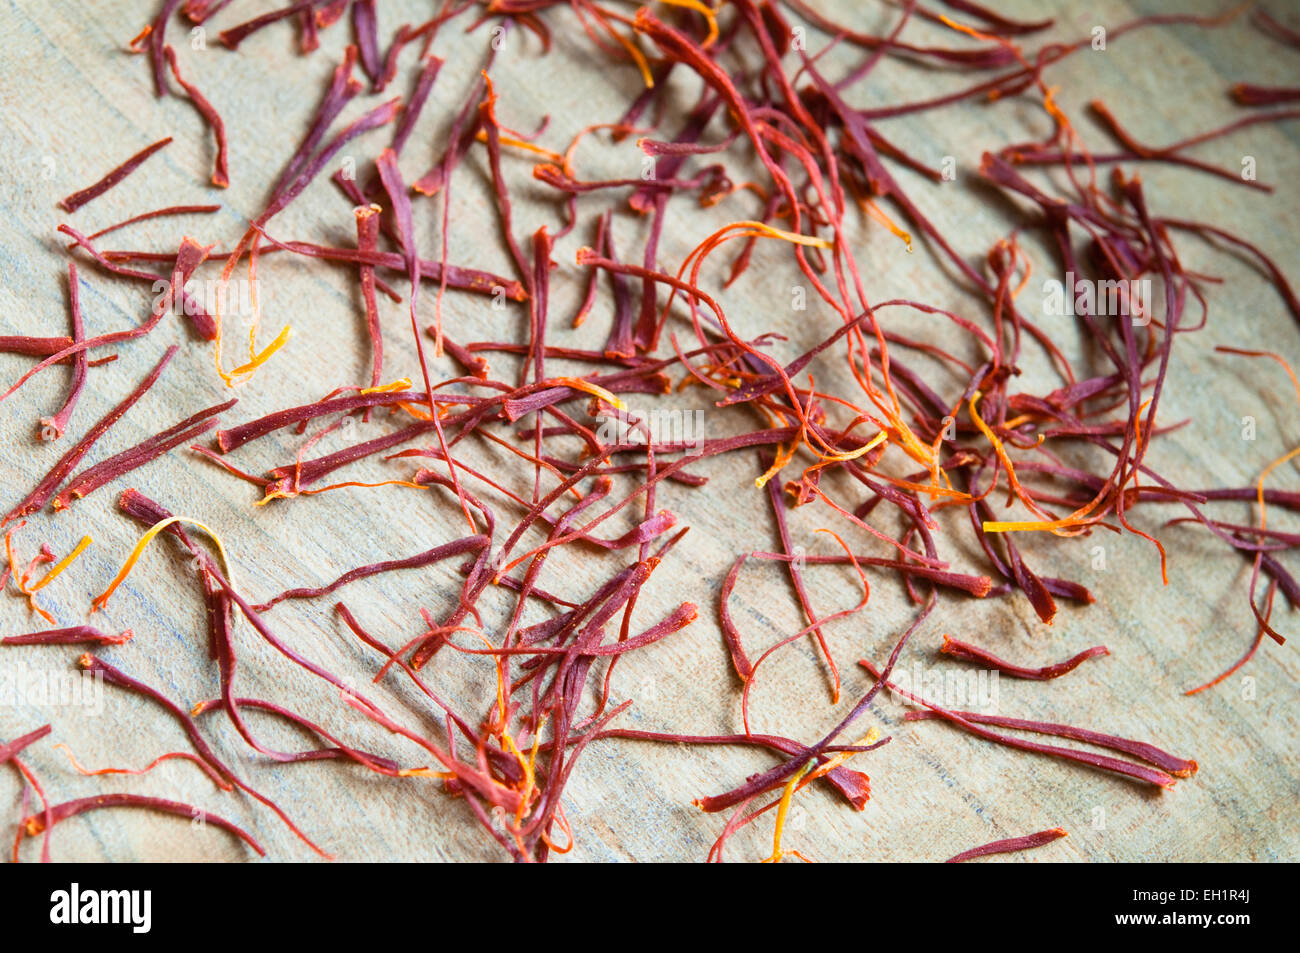 Close up view of Saffron Threads in an Olive Wood Bowl Stock Photo